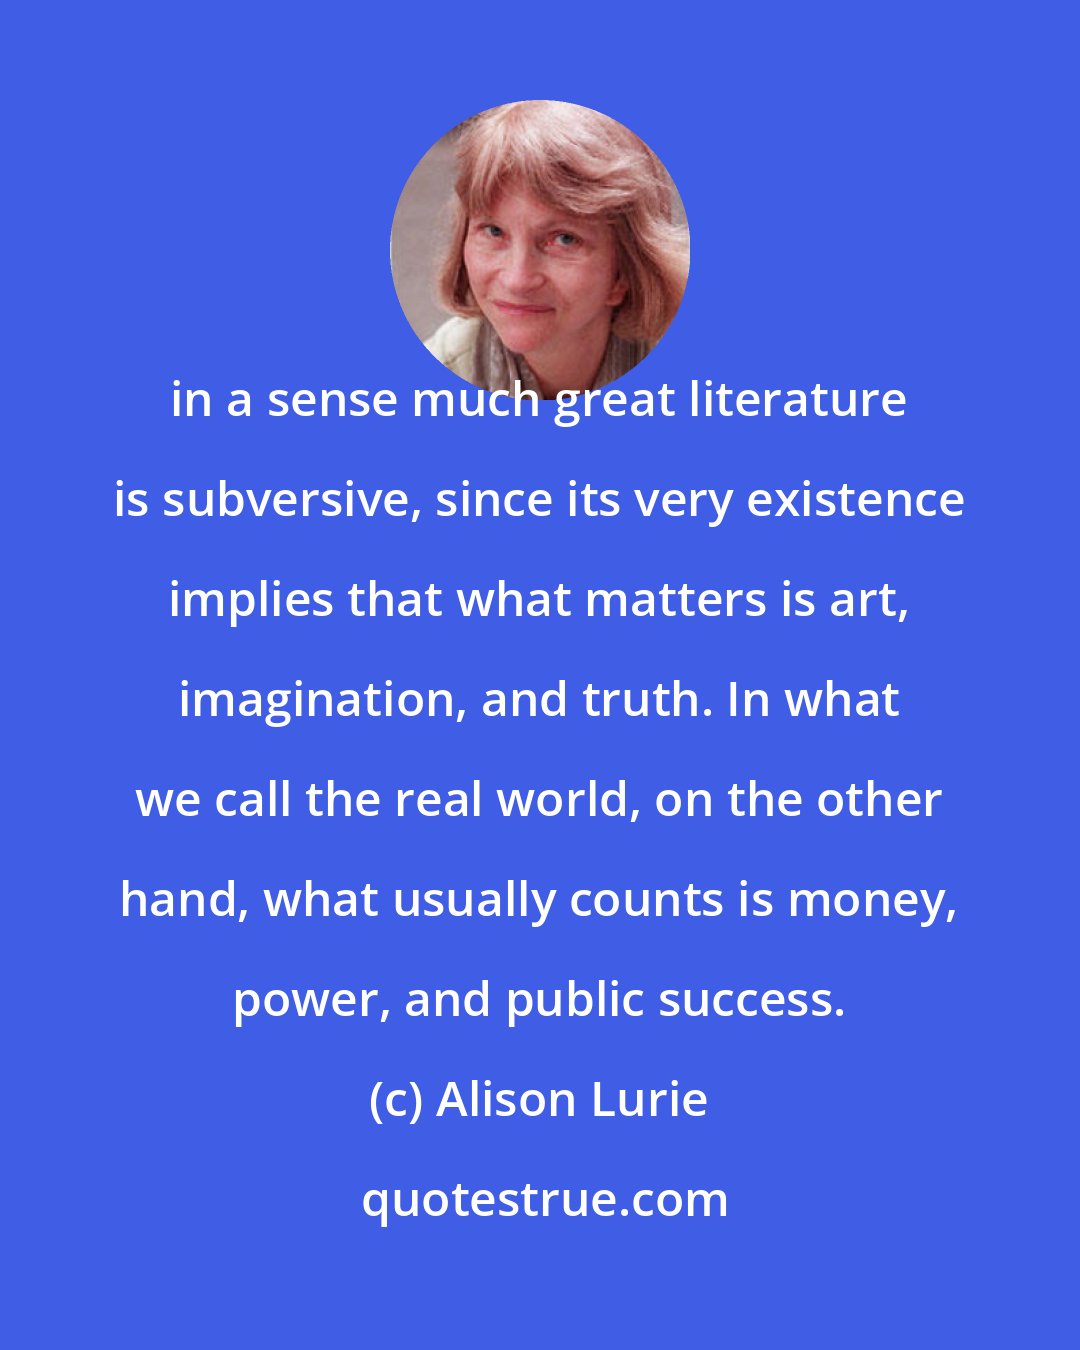 Alison Lurie: in a sense much great literature is subversive, since its very existence implies that what matters is art, imagination, and truth. In what we call the real world, on the other hand, what usually counts is money, power, and public success.